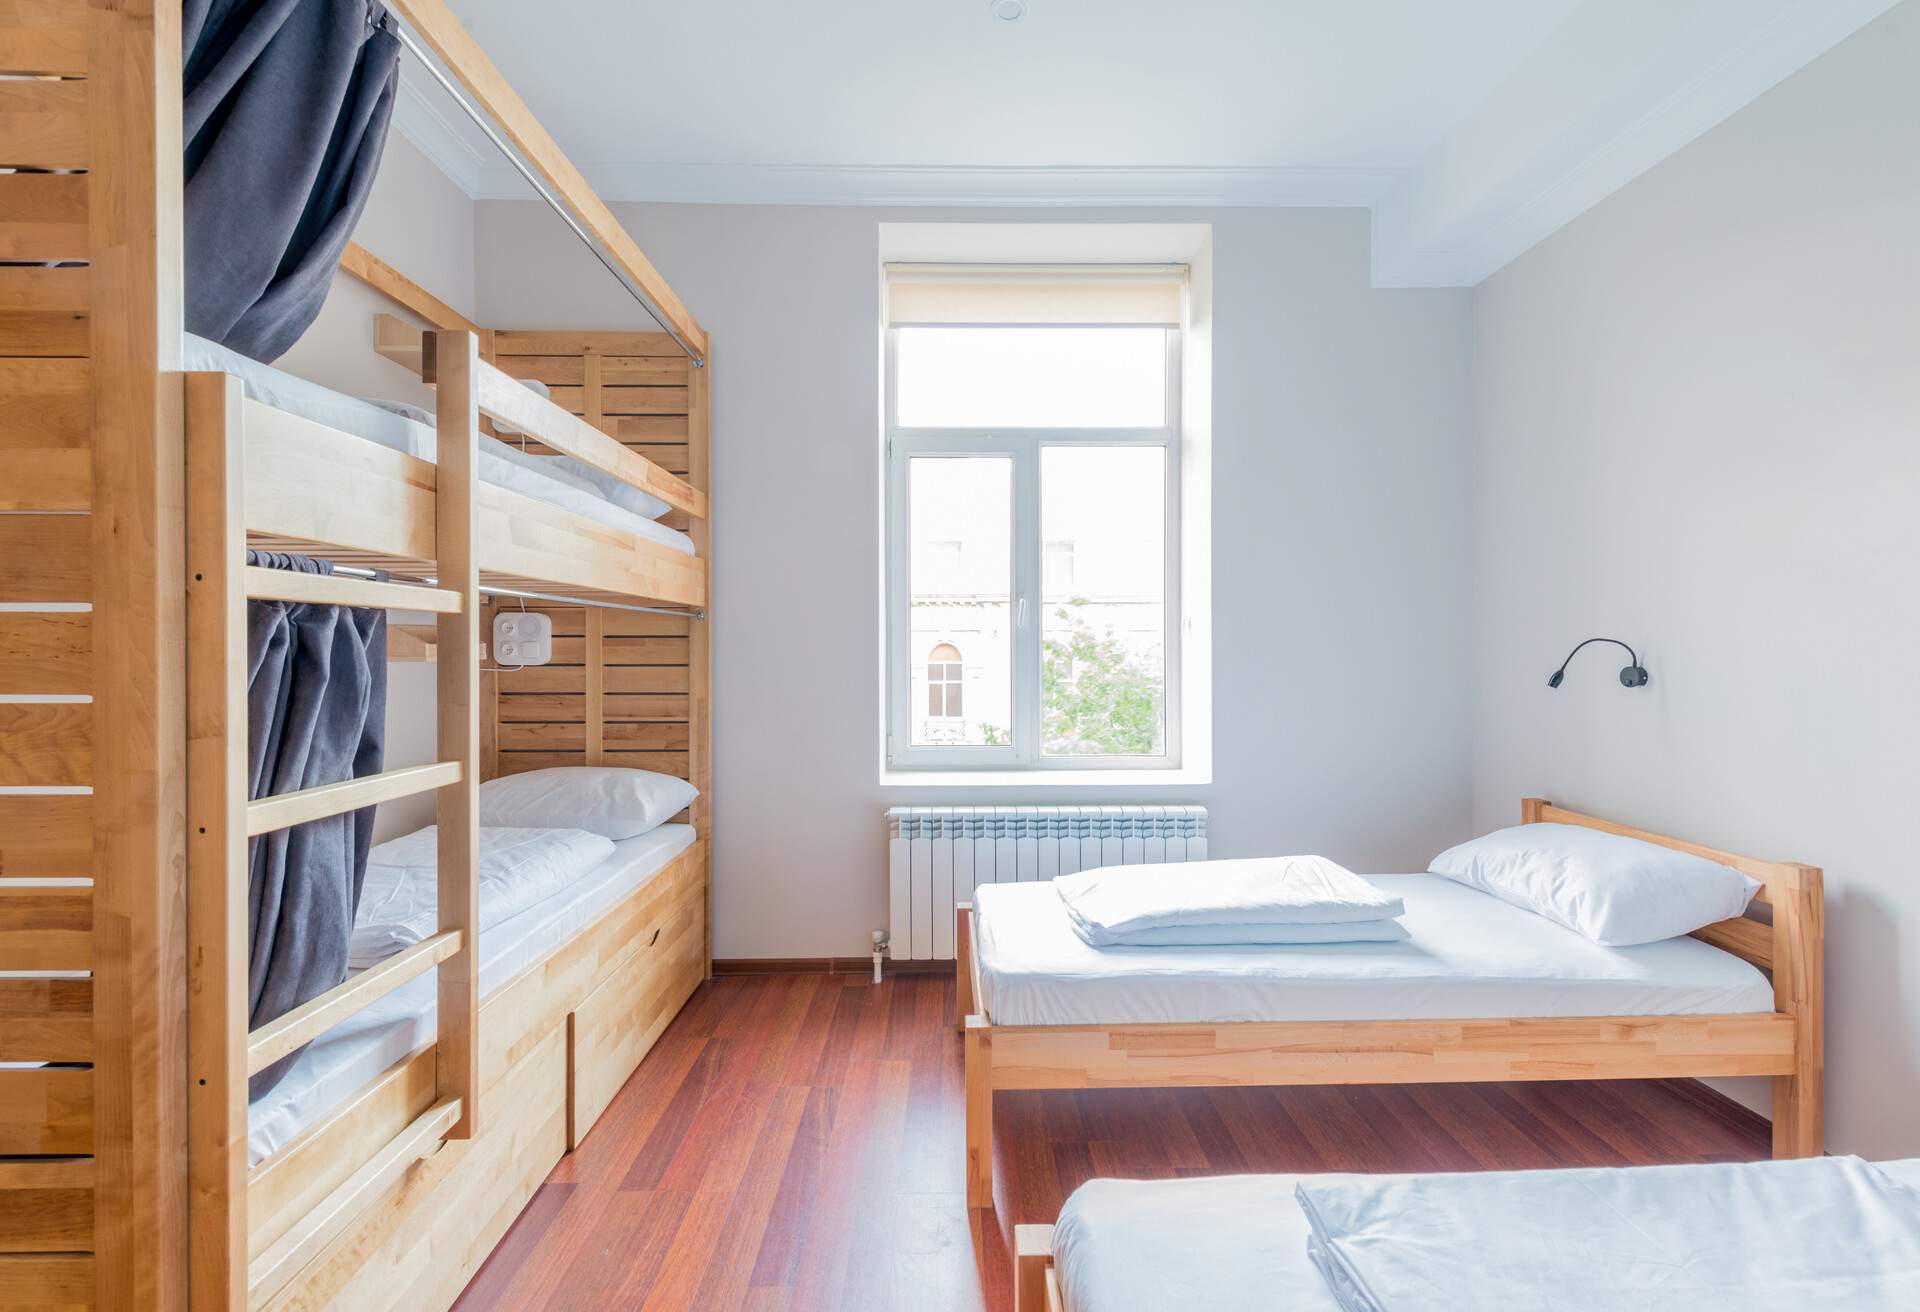 A hostel room with a bunk bed and twin beds.